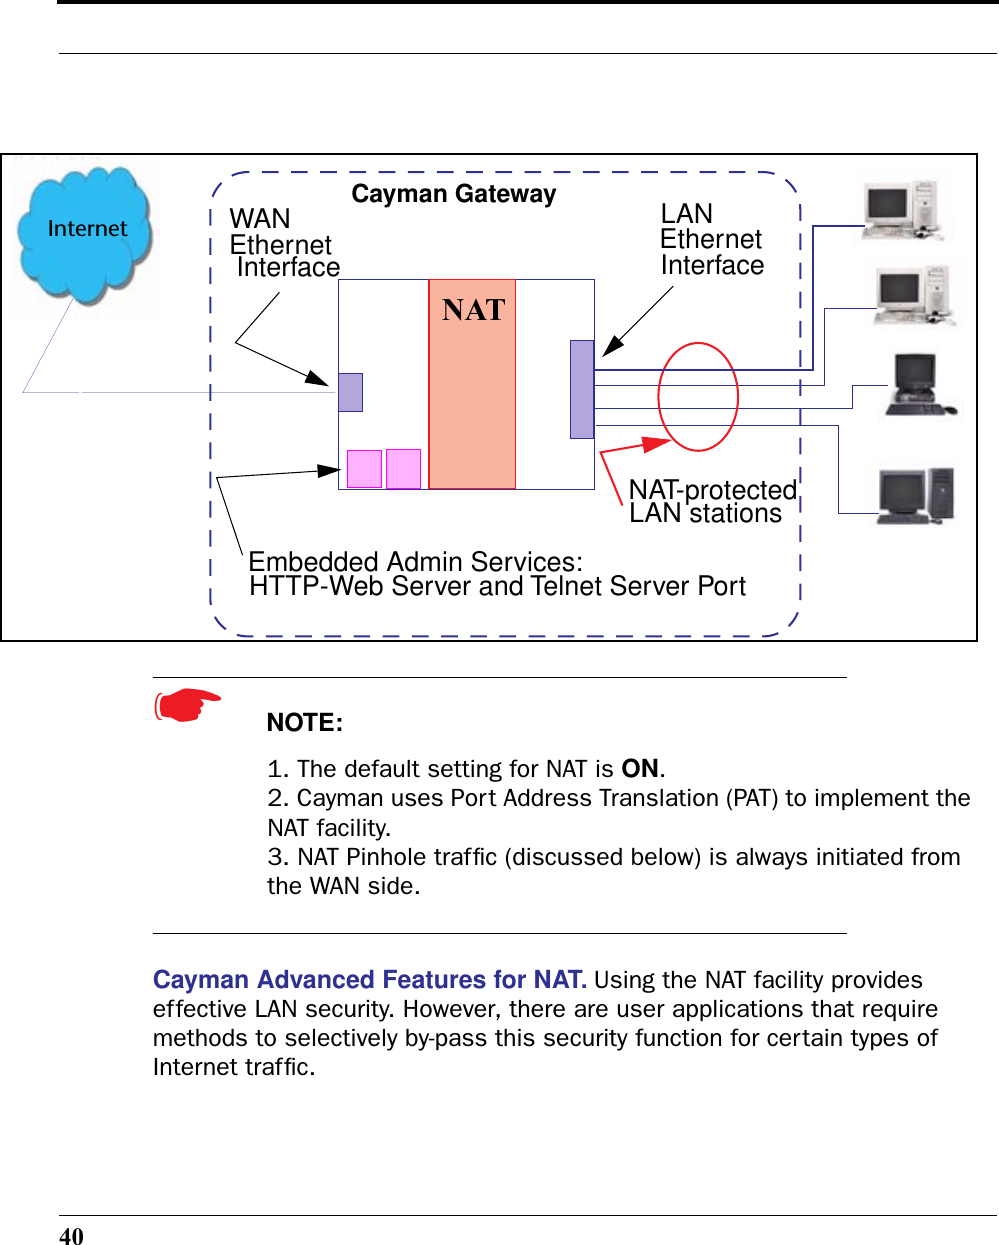 40 ☛  NOTE:1. The default setting for NAT is ON.2. Cayman uses Port Address Translation (PAT) to implement the NAT facility.3. NAT Pinhole trafﬁc (discussed below) is always initiated from the WAN side.Cayman Advanced Features for NAT. Using the NAT facility provides effective LAN security. However, there are user applications that require methods to selectively by-pass this security function for certain types of Internet trafﬁc.WAN InterfaceLANEthernet InterfaceCayman GatewayNATInternetEmbedded Admin Services:HTTP-Web Server and Telnet Server PortNAT-protectedLAN stationsEthernet